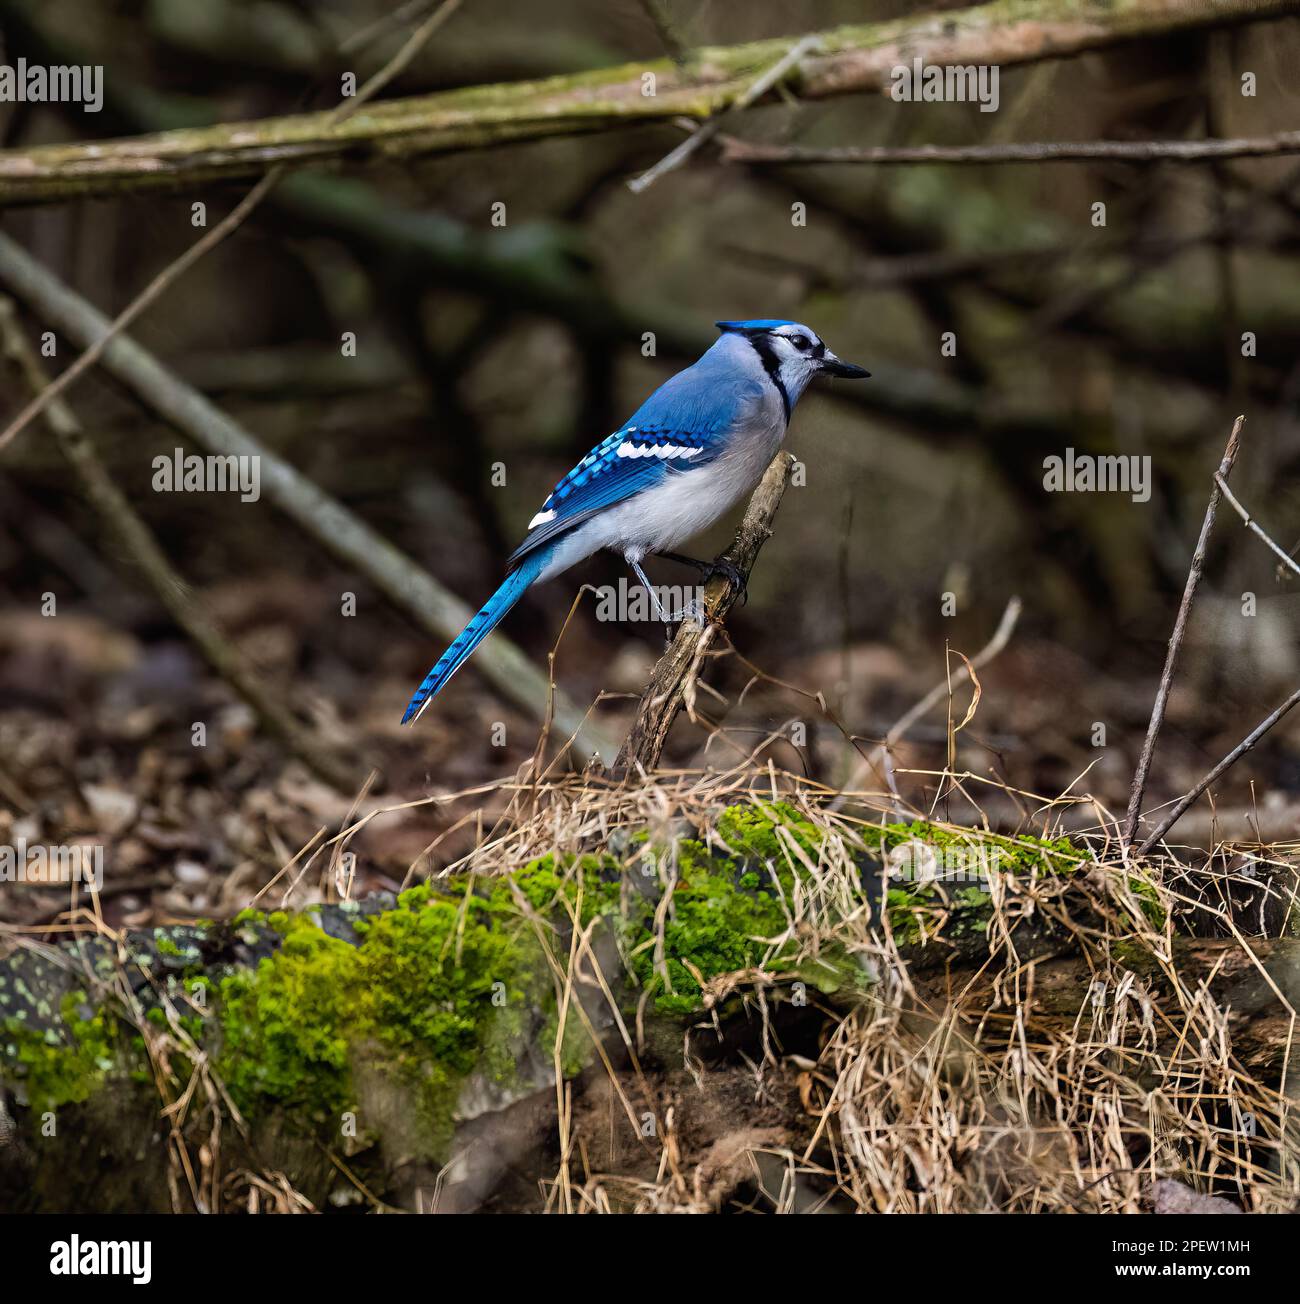 A closeup of a cute blue jay perched on a tree branch in a forest Stock Photo